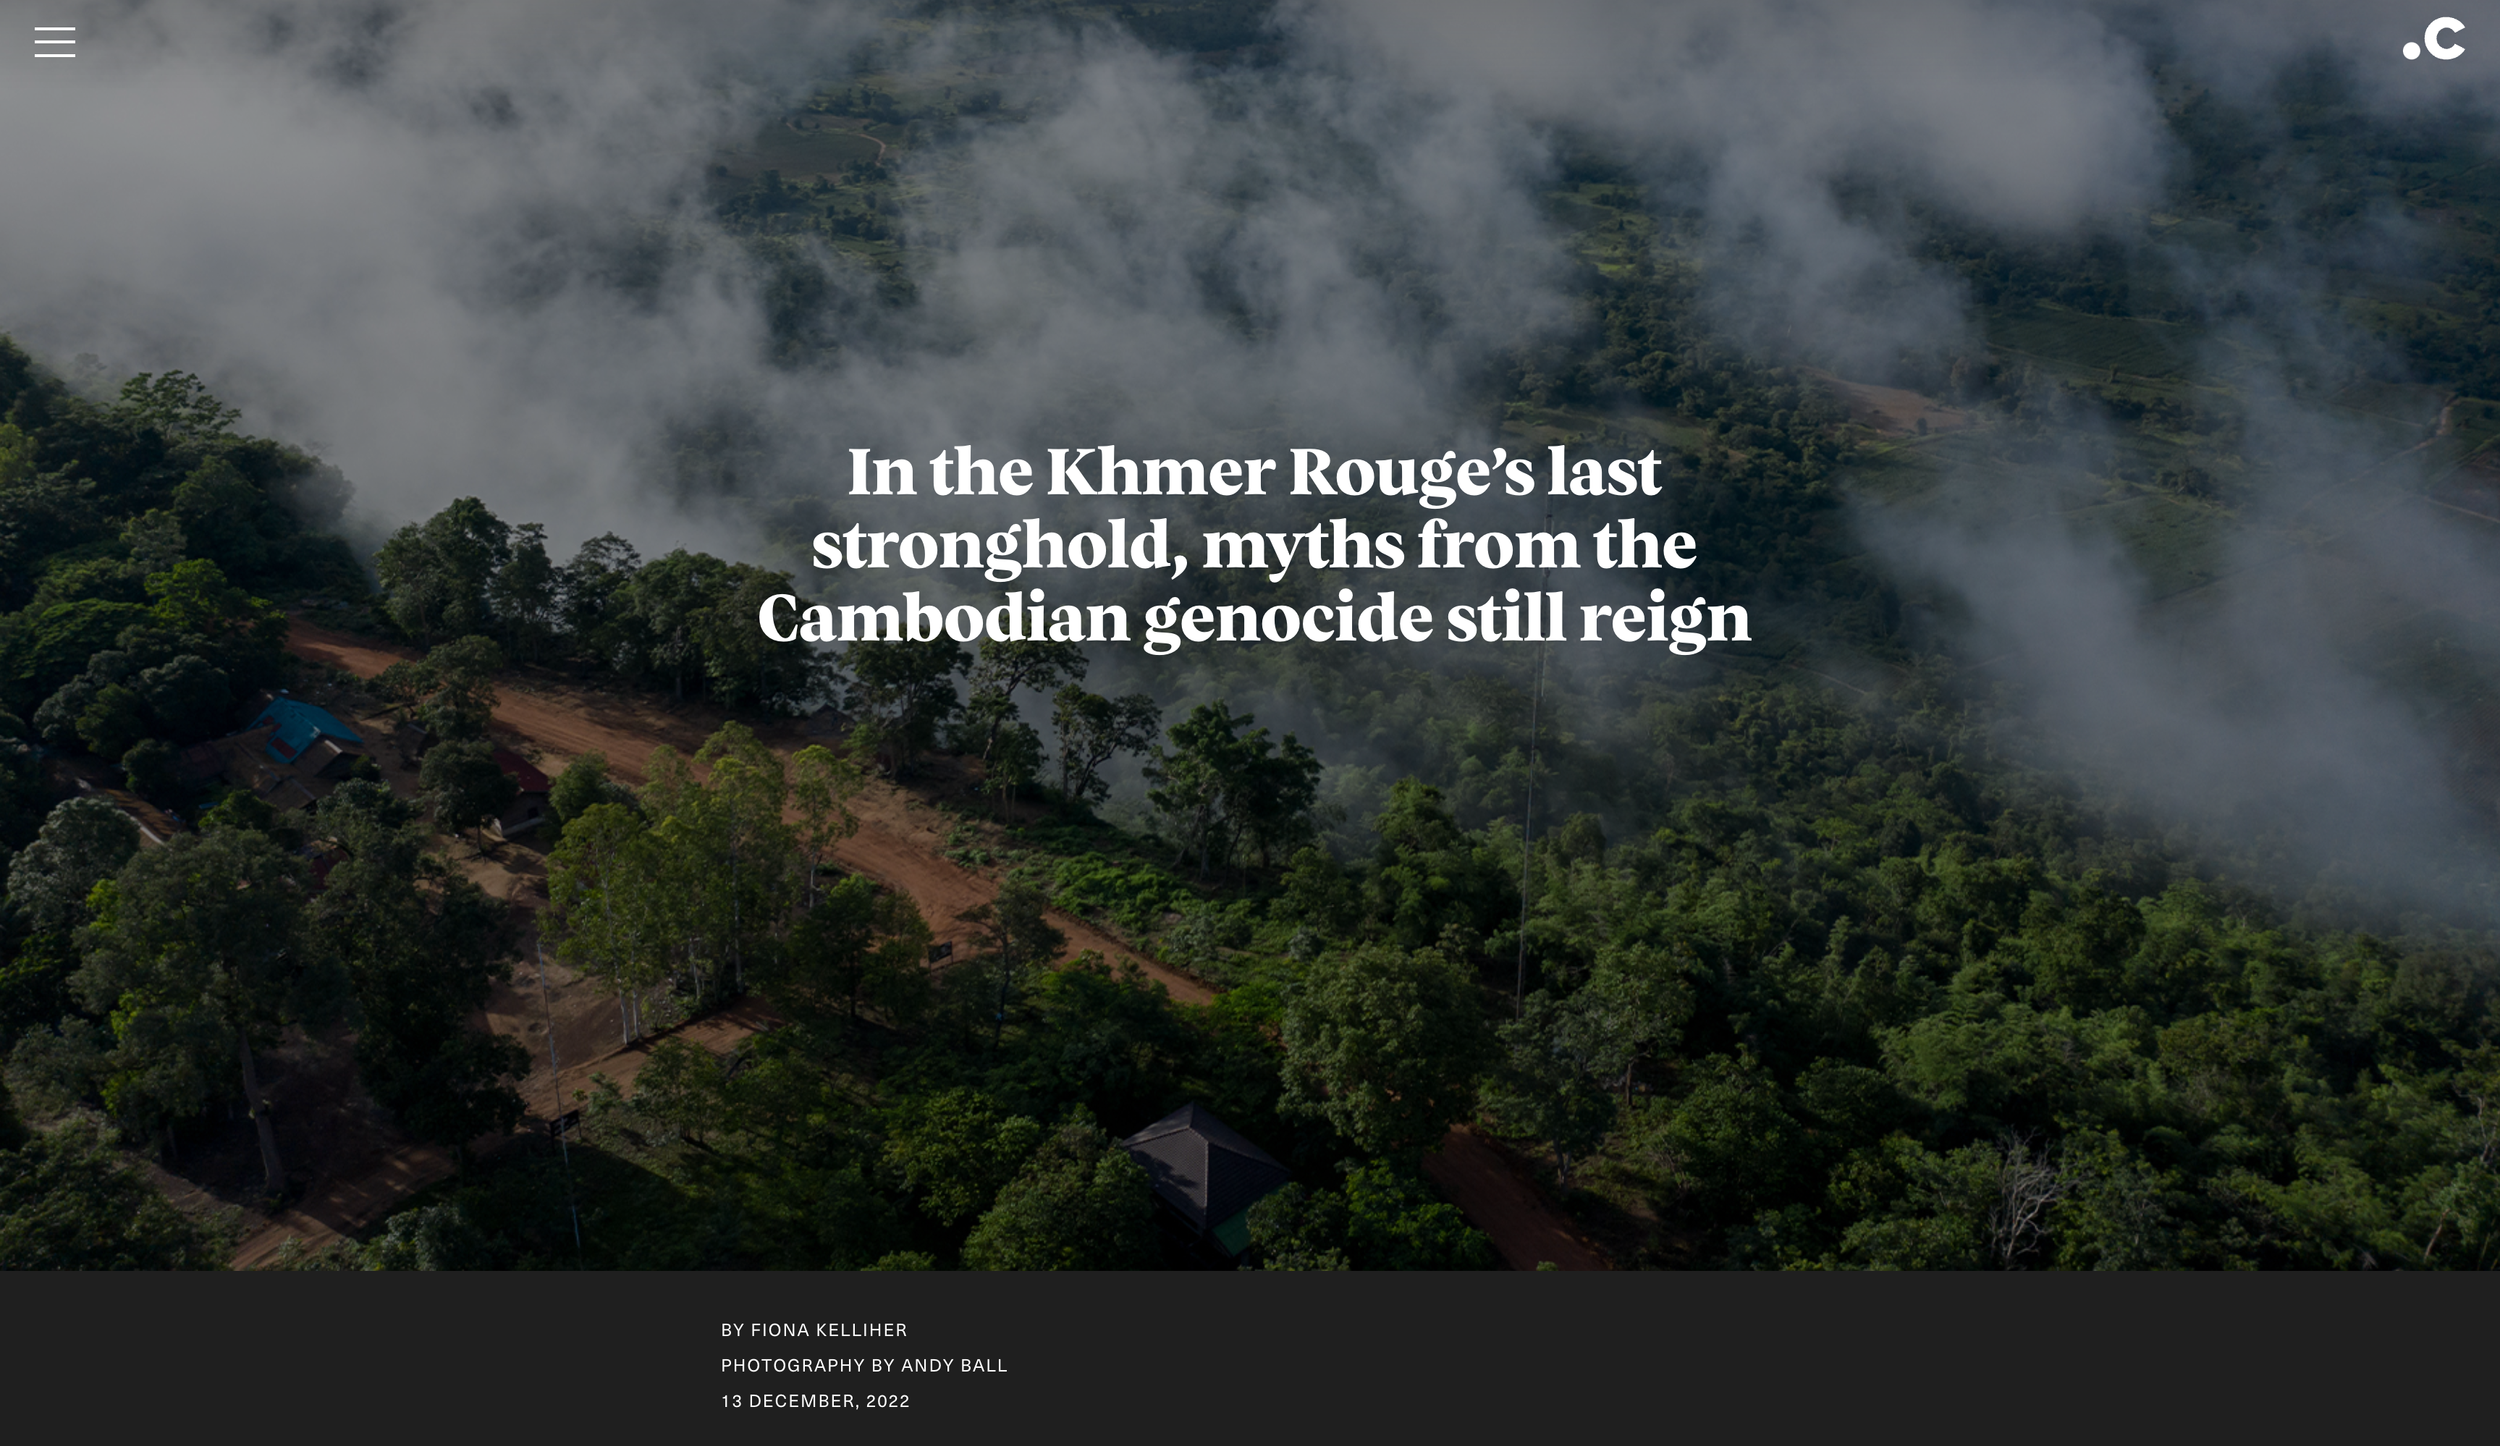 14th December 2022 In the Khmer Rouge's last stronghold, myths from the Cambodian genocide still reign - Coda Story.png